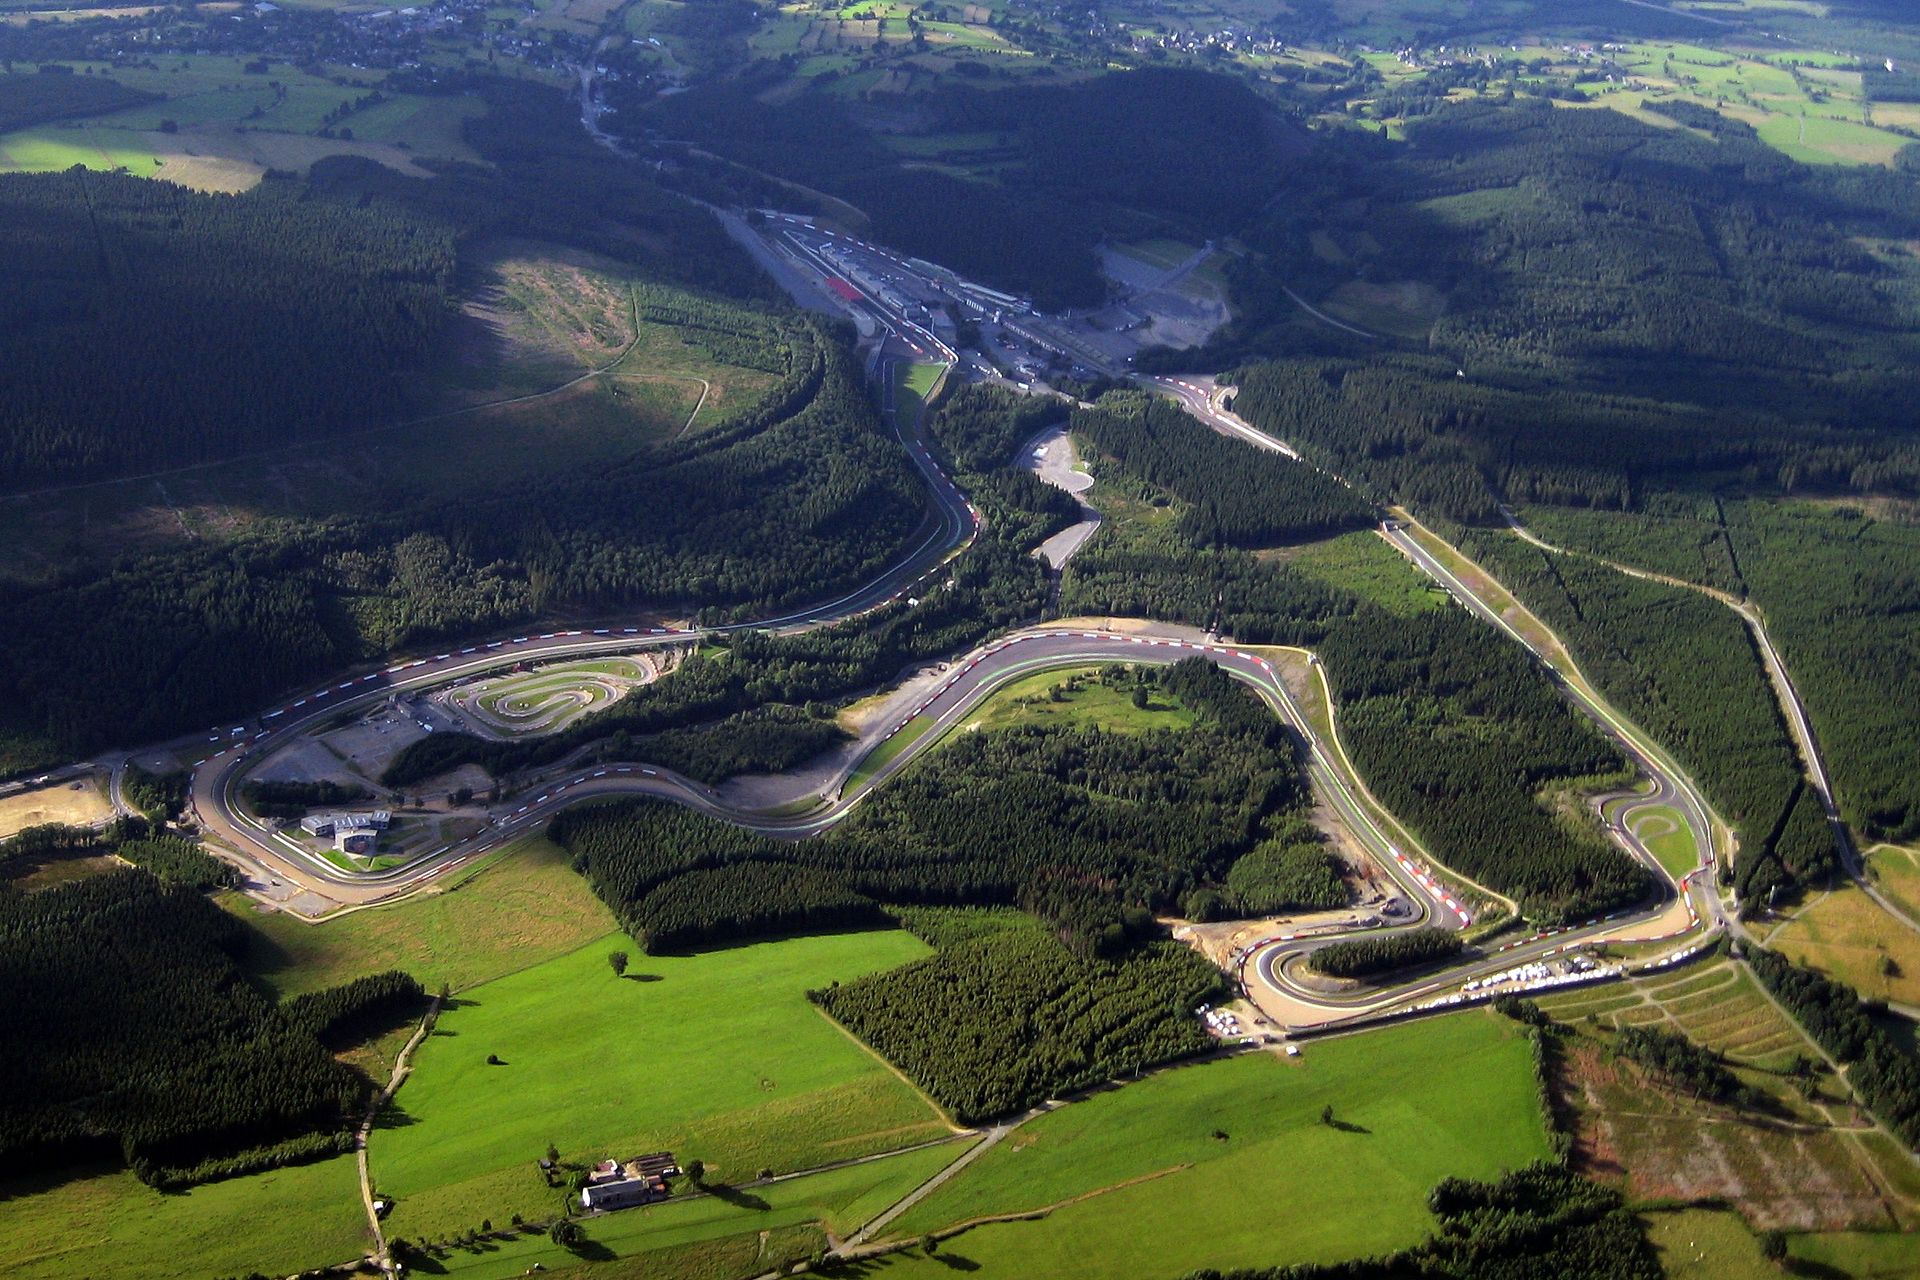 Luchtfoto Spa-Francorchamps (Bron: Wikimedia)